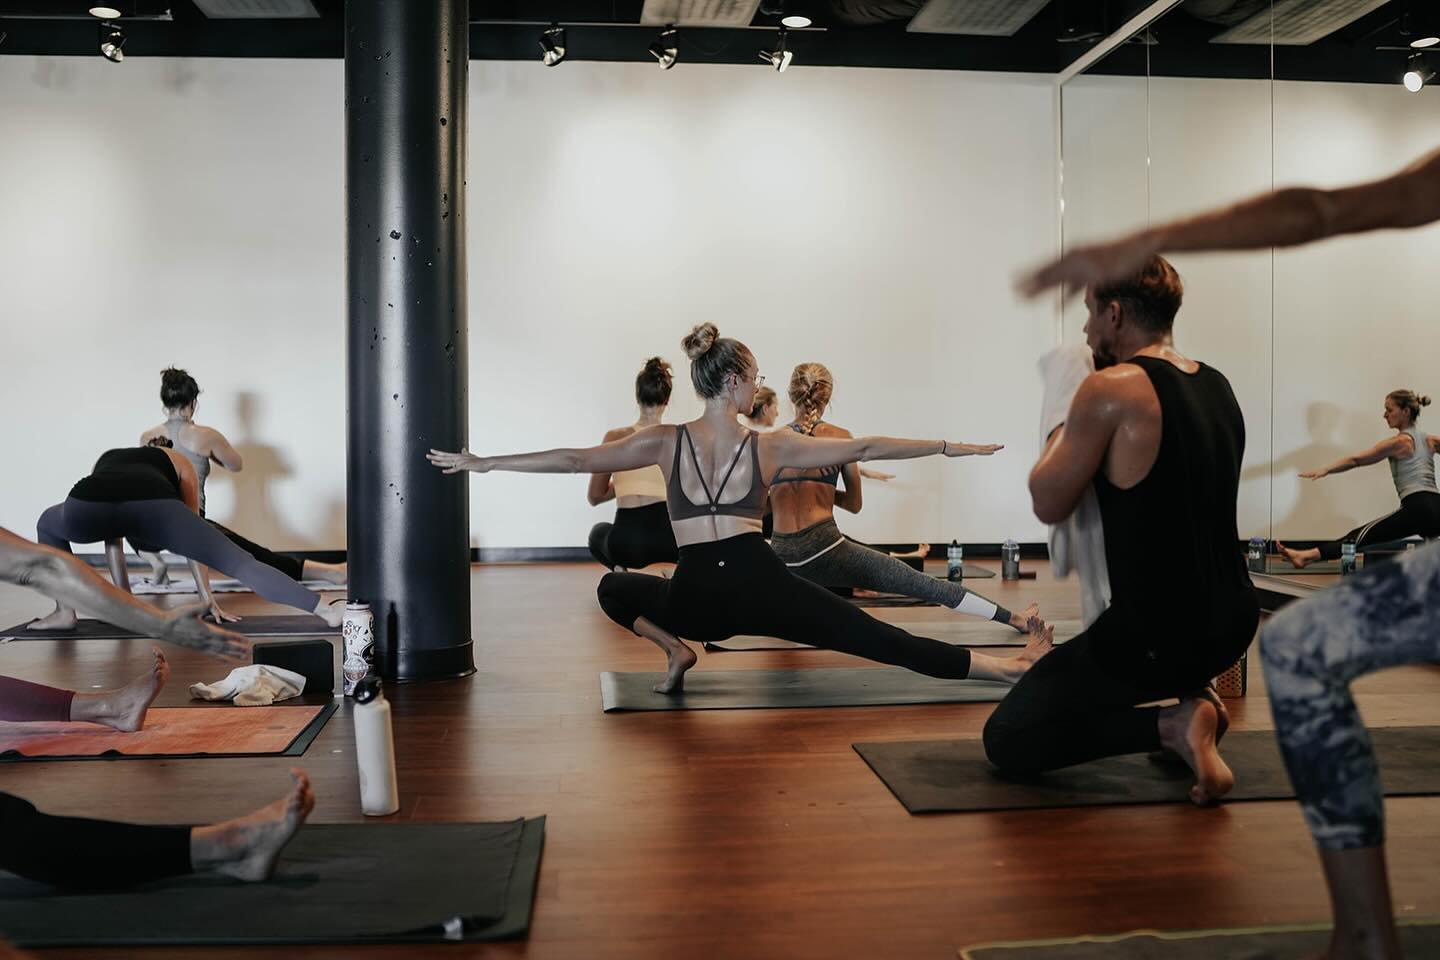 Yoga done right, whether it's your first class or your 100th visit.

Curious what types of yoga classes we offer? Our website details our class formats, and our Weekly Schedule at a Glance provides a visual guide to each day's class schedule across t